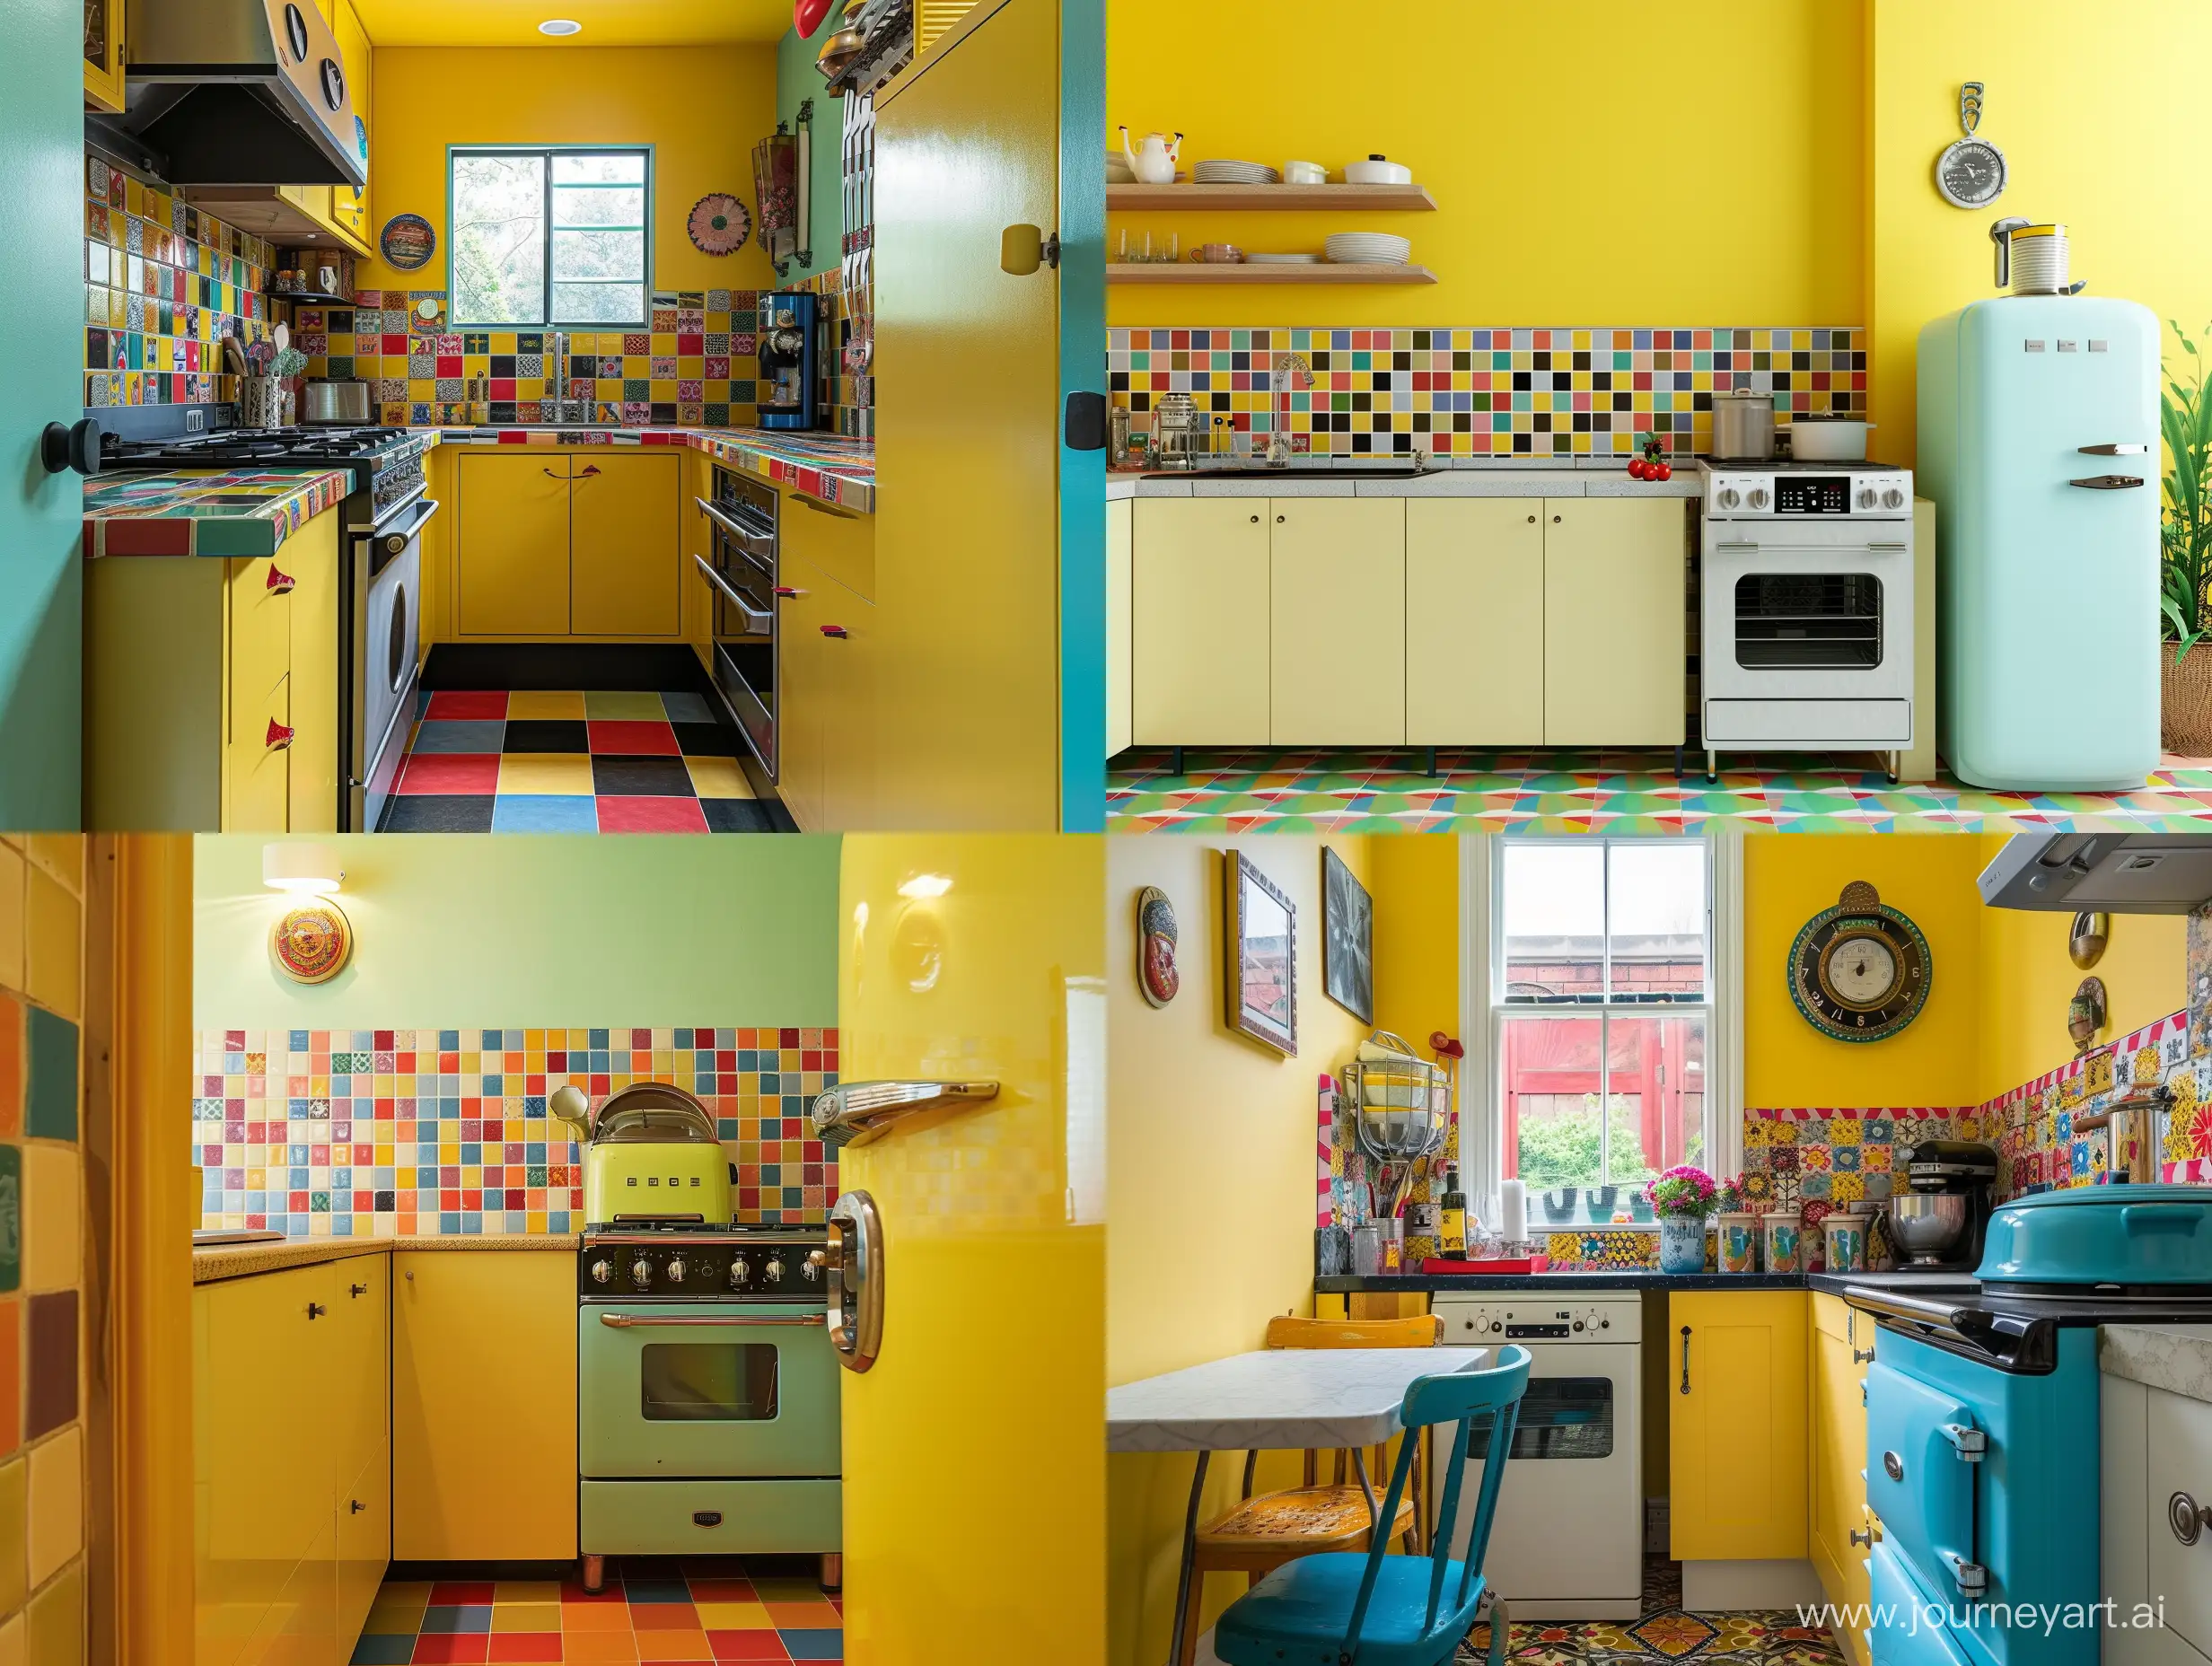 Cheerful kitchen with a retro-inspired design. The room features a colorful tiled blacksplash and vintage appliance. The walls are painted in a sunny yellow color.